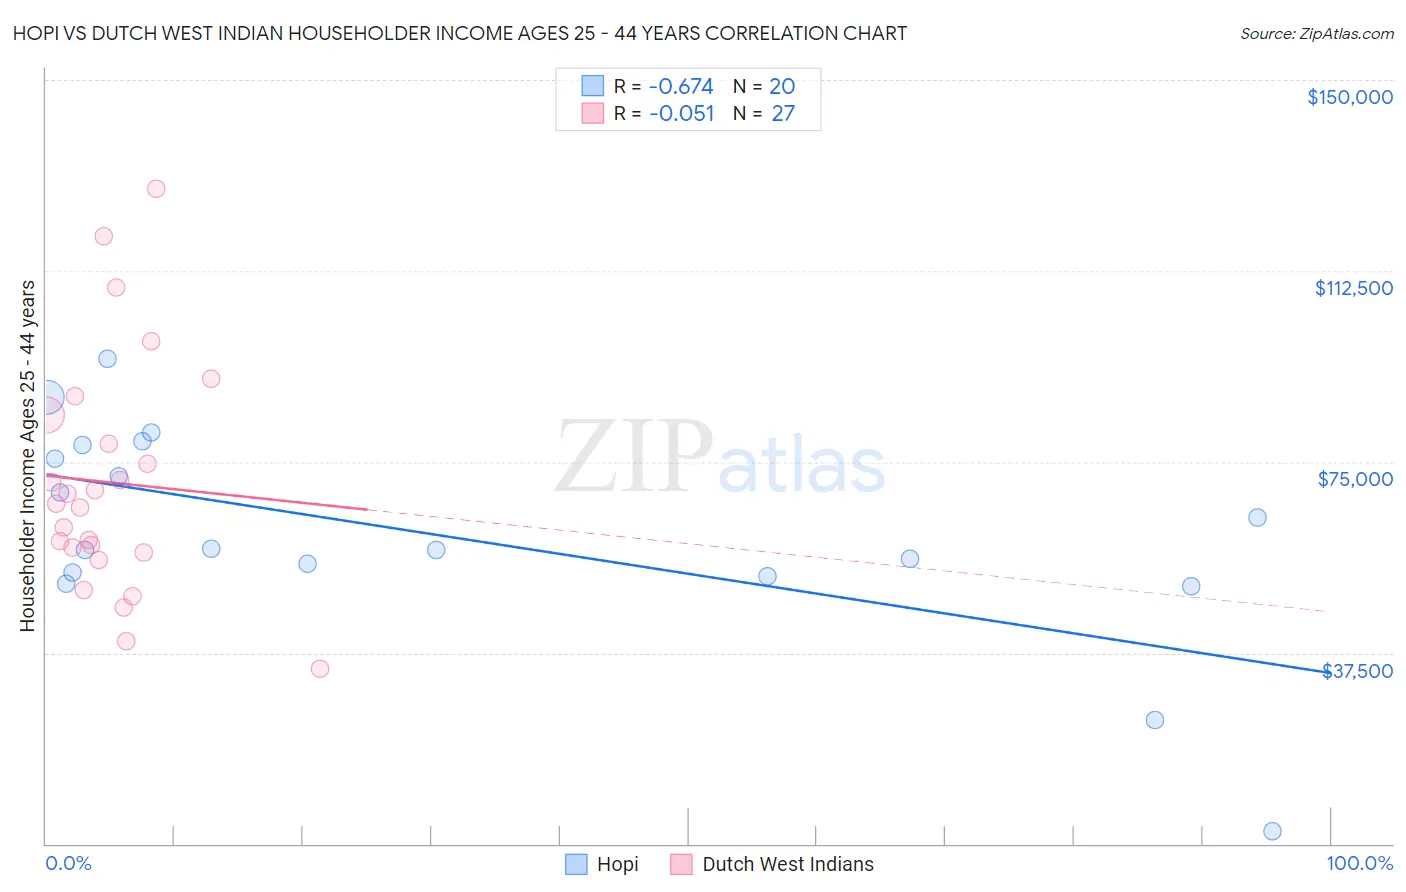 Hopi vs Dutch West Indian Householder Income Ages 25 - 44 years